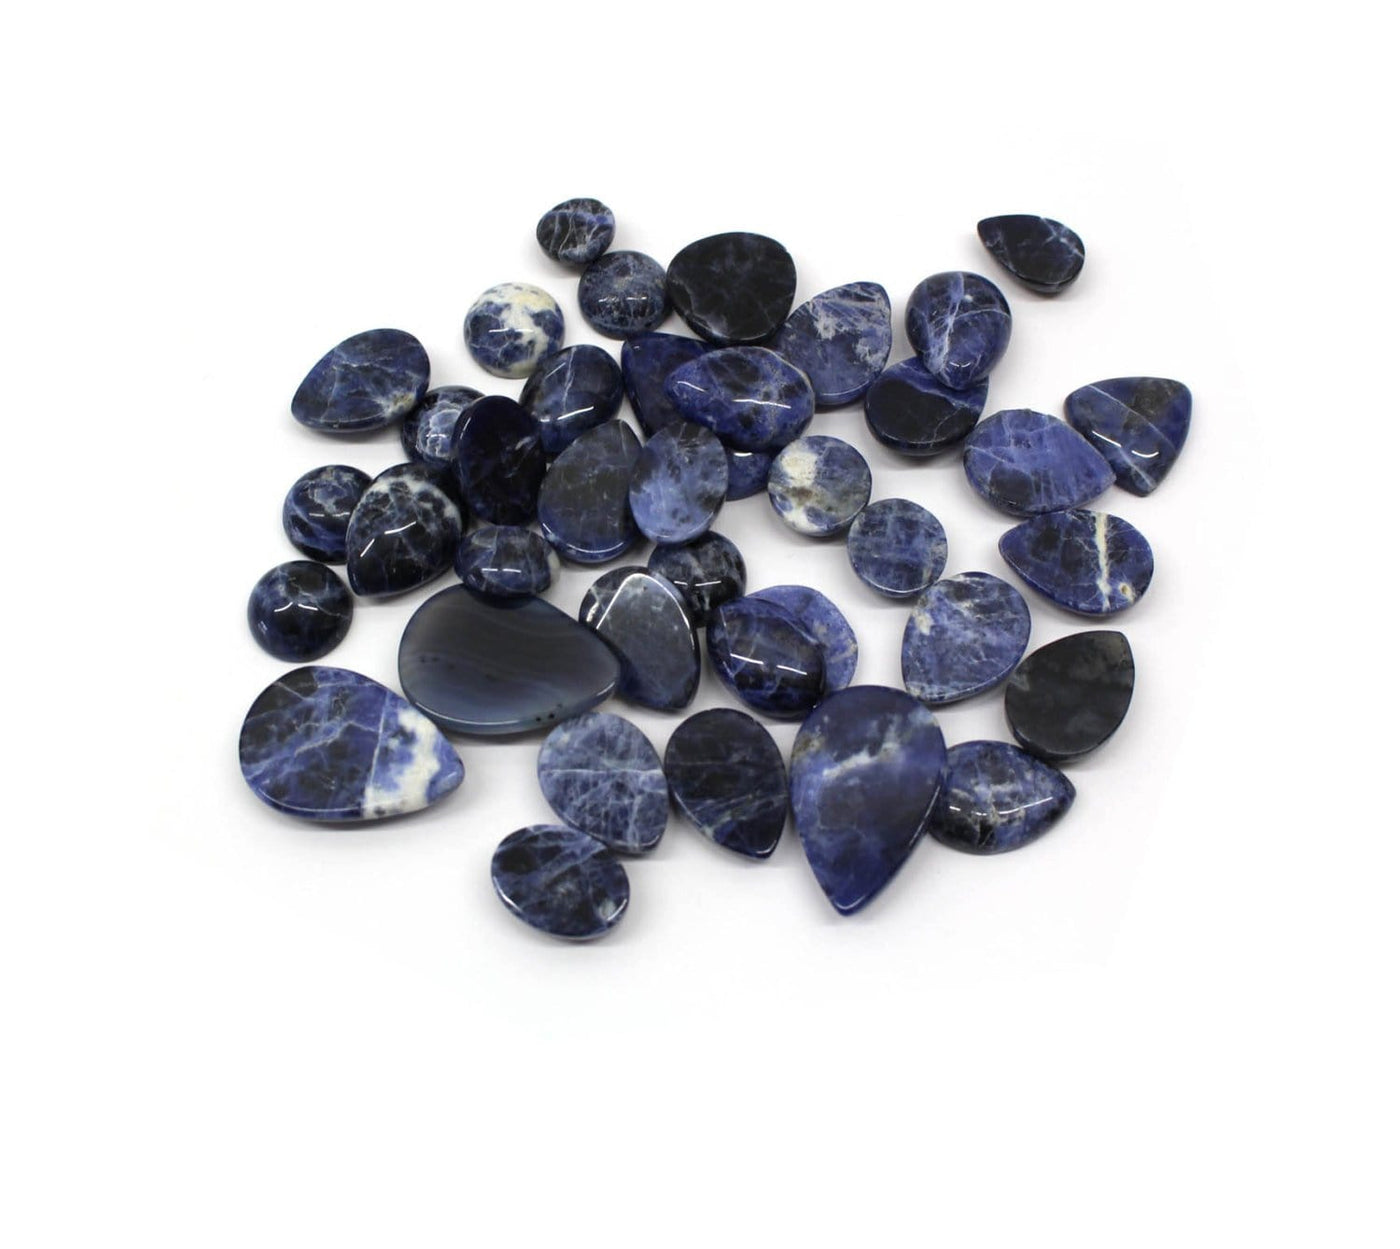 1/4 pound of blue sodalite mixed shapes cabochons